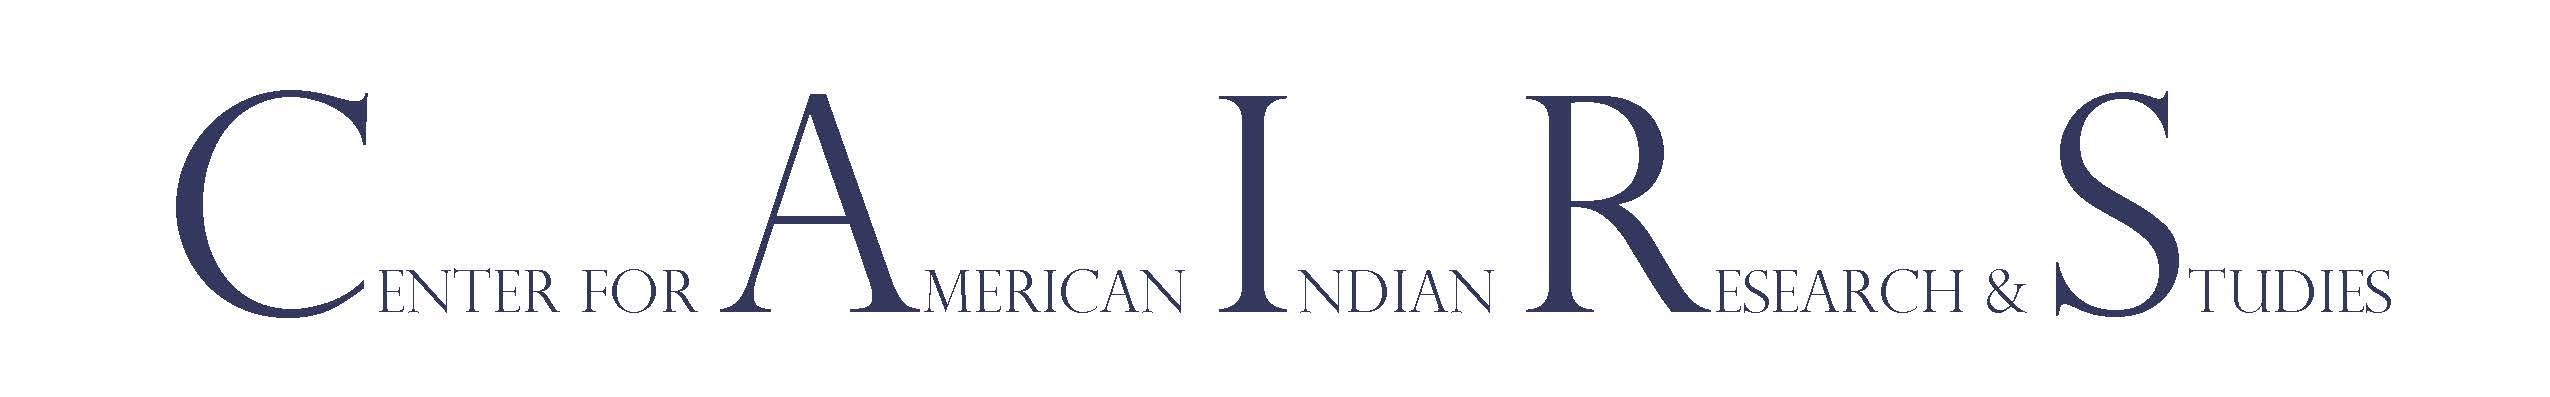 Center for American Indian Research and Studies